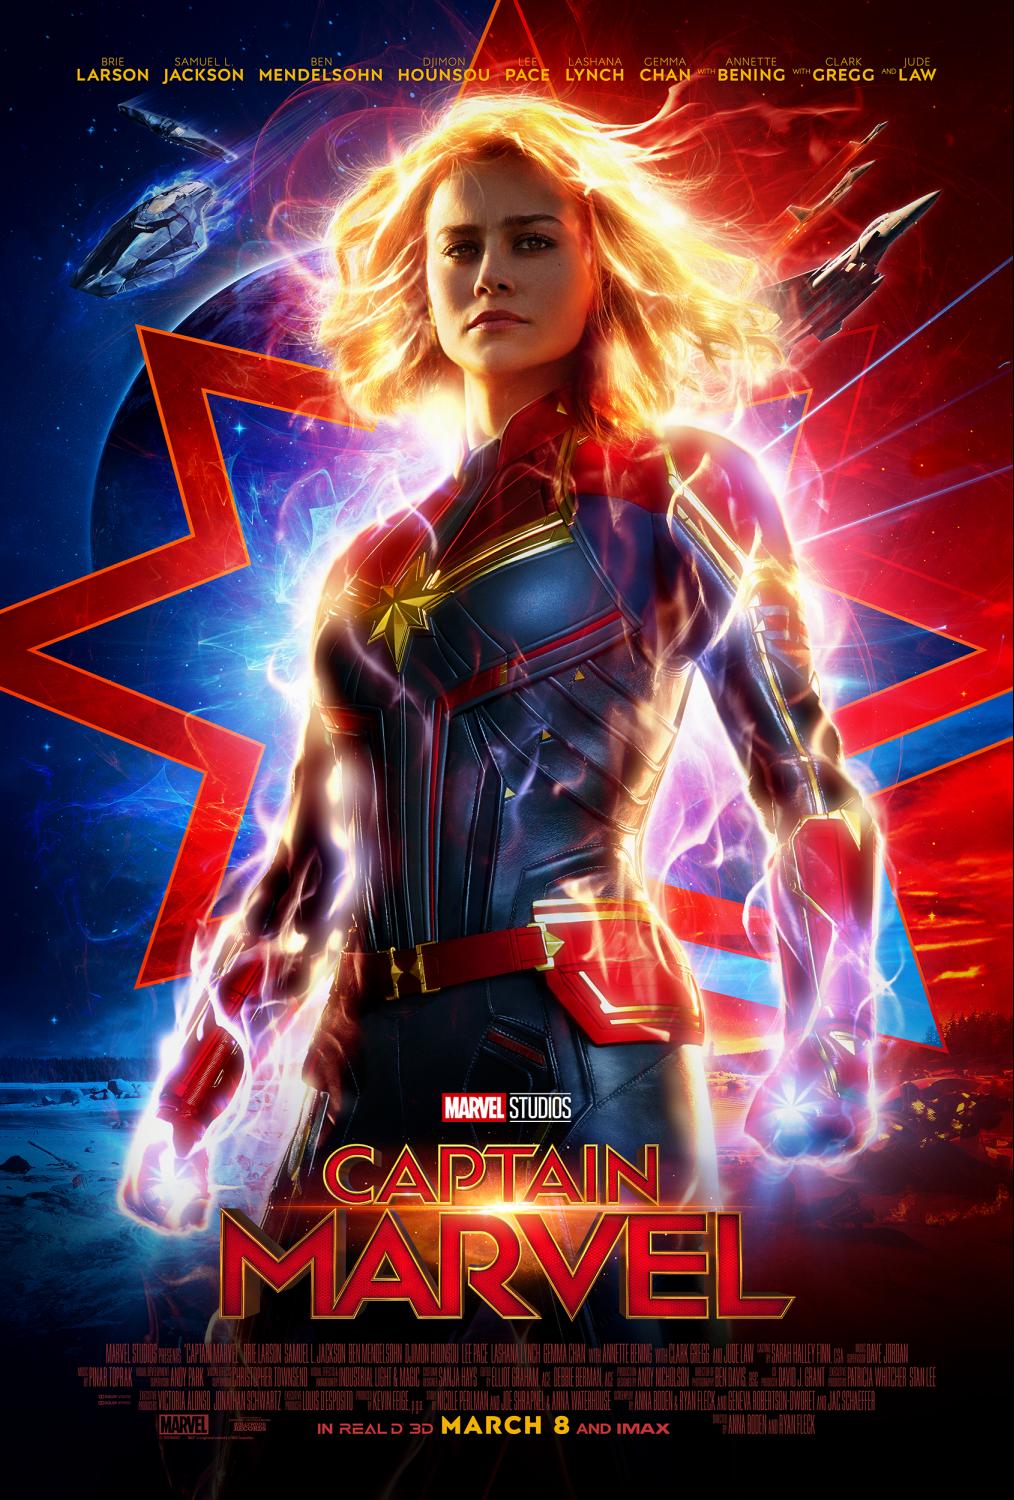 It's here, it's here, it's here!! New trailer and poster for Marvel Studios’ CAPTAIN MARVEL! Watch and let me know what you think. 